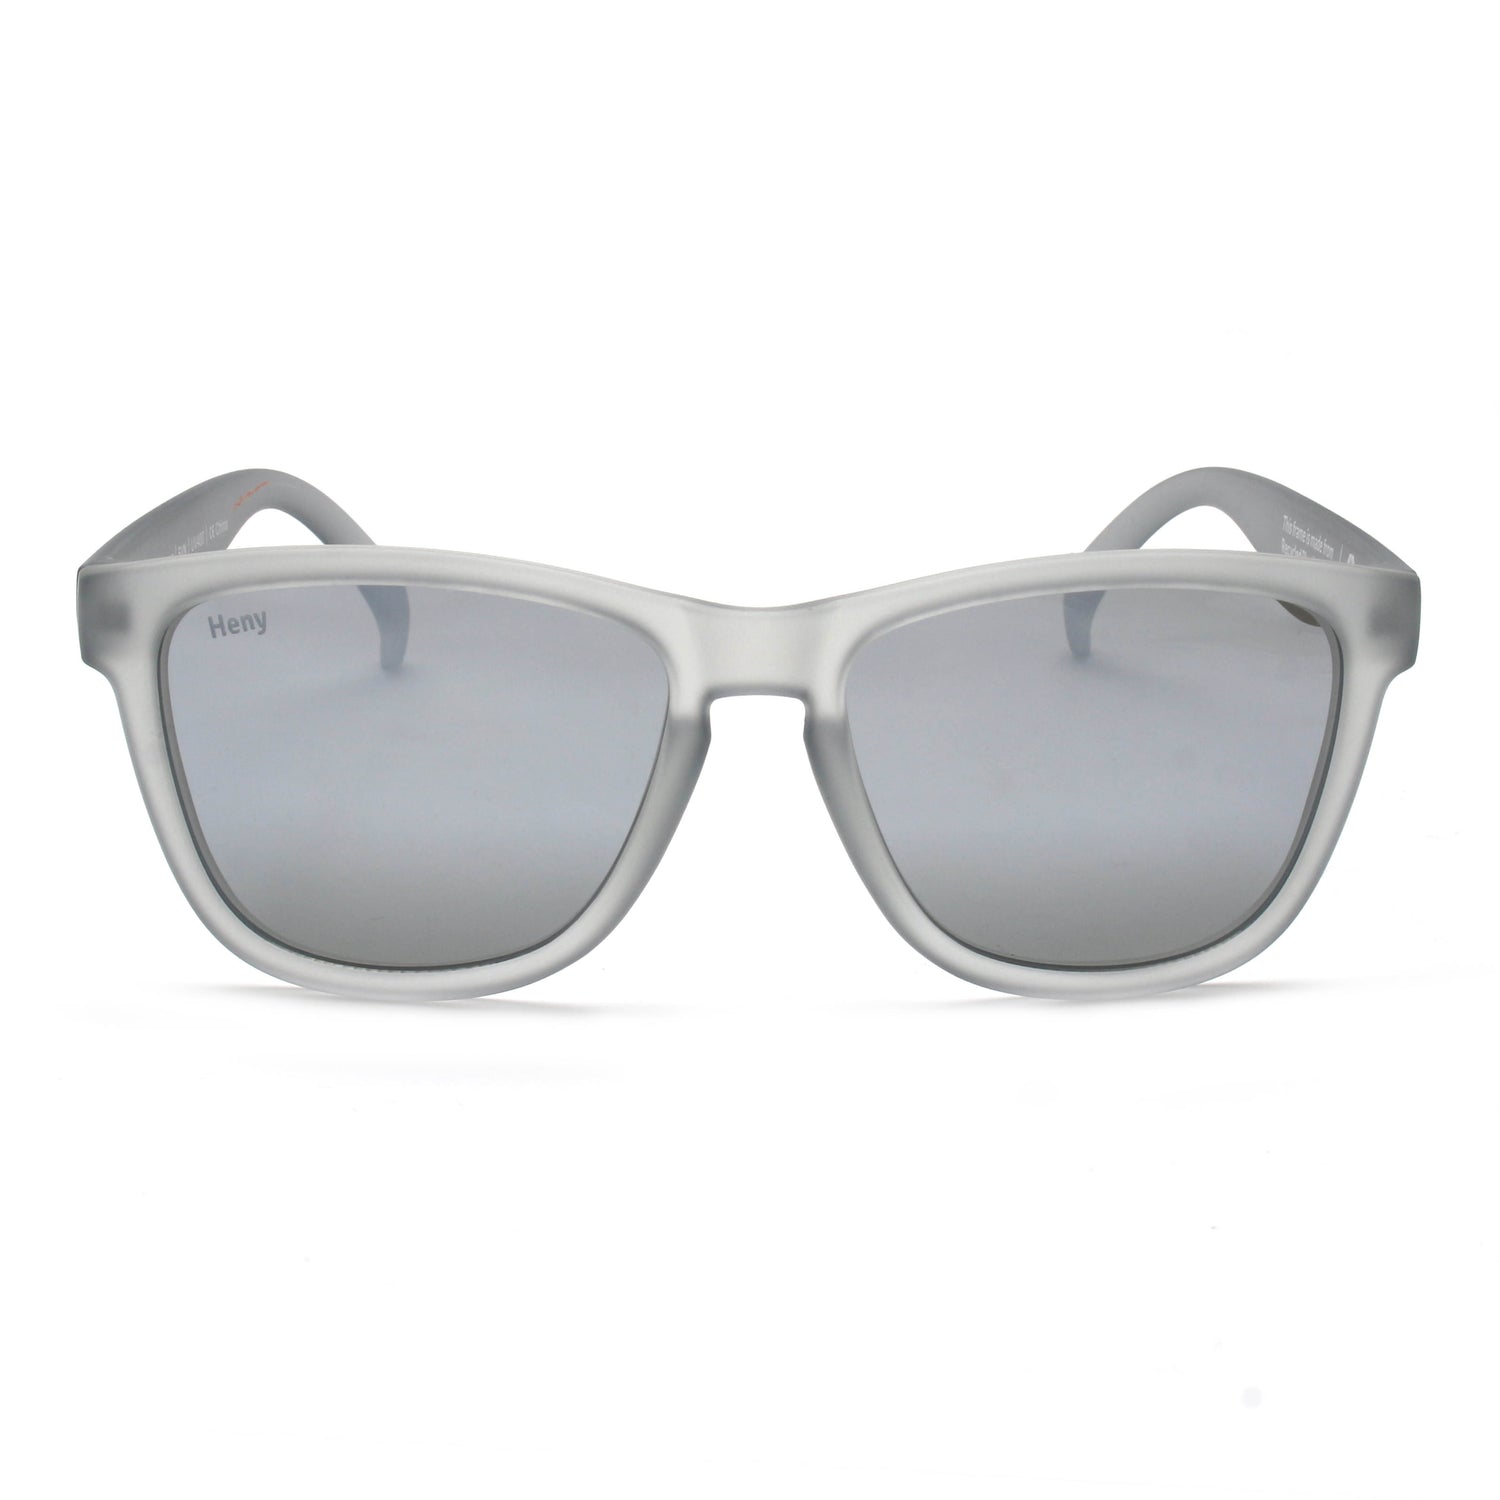 Front view of the Silver Surfer Polarized Original Heny Sunglasses